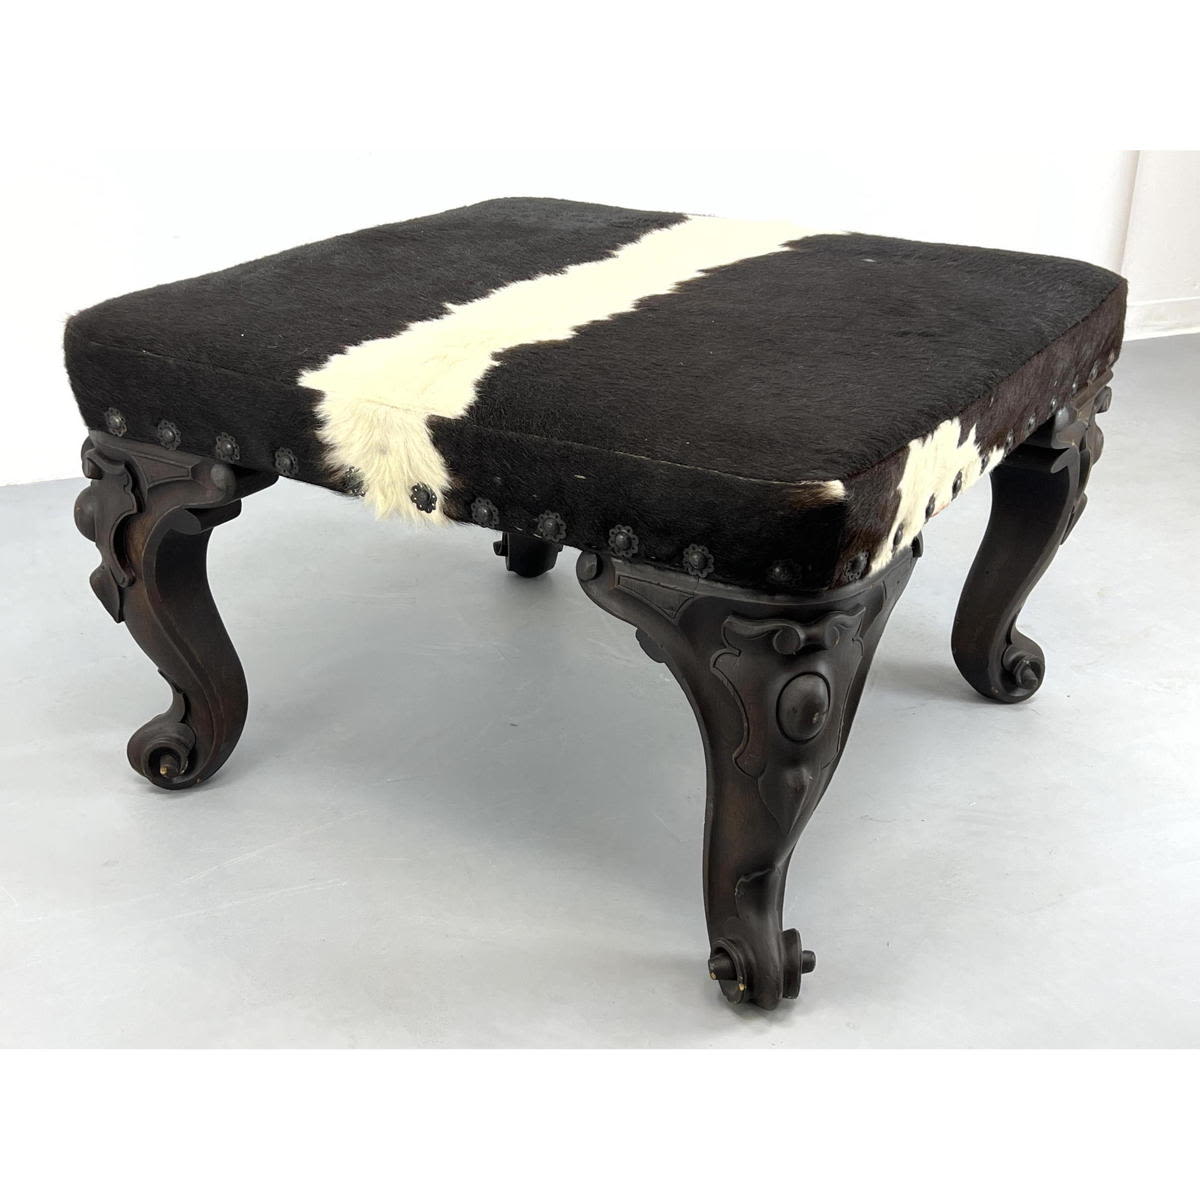 Oversized ottoman table bench with